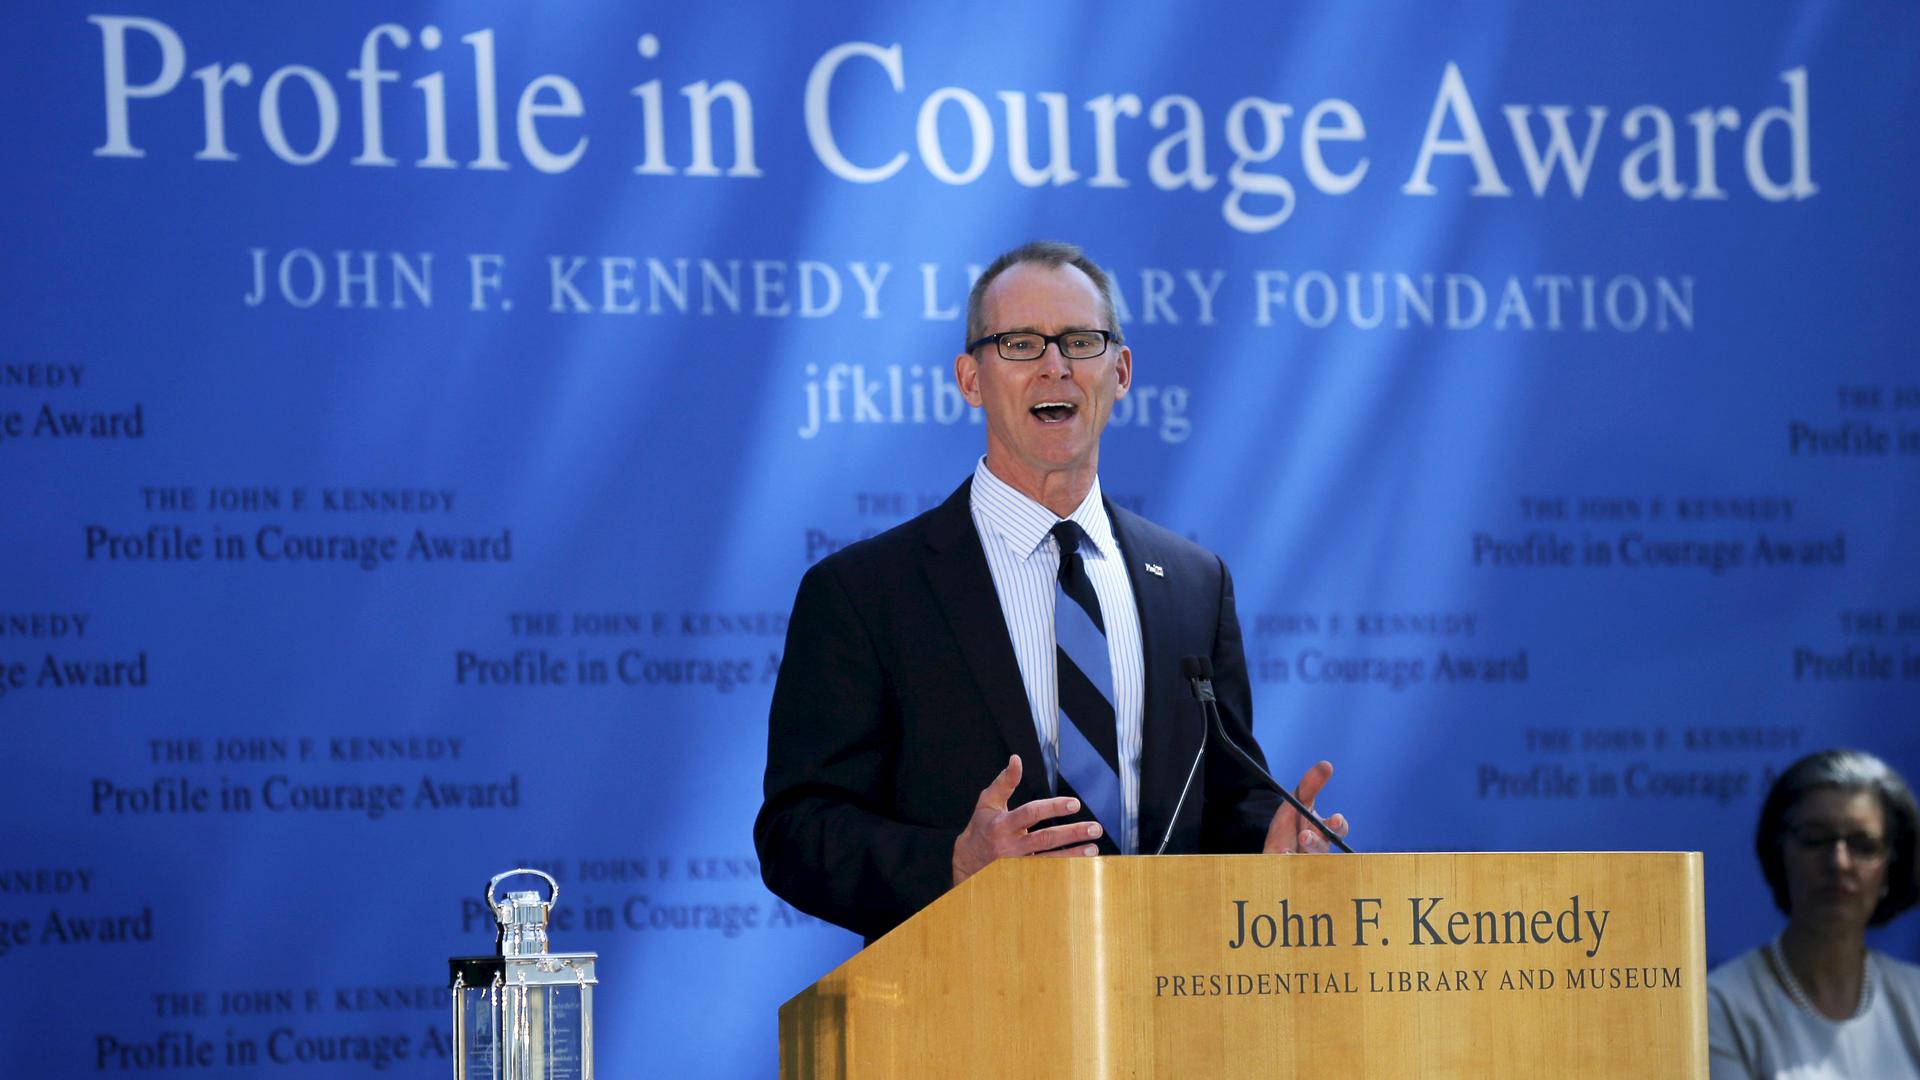 Former U.S. Representative Bob Inglis was awarded the 2015 John F. Kennedy Profile in Courage Award for changing his position on climate change at big political cost.